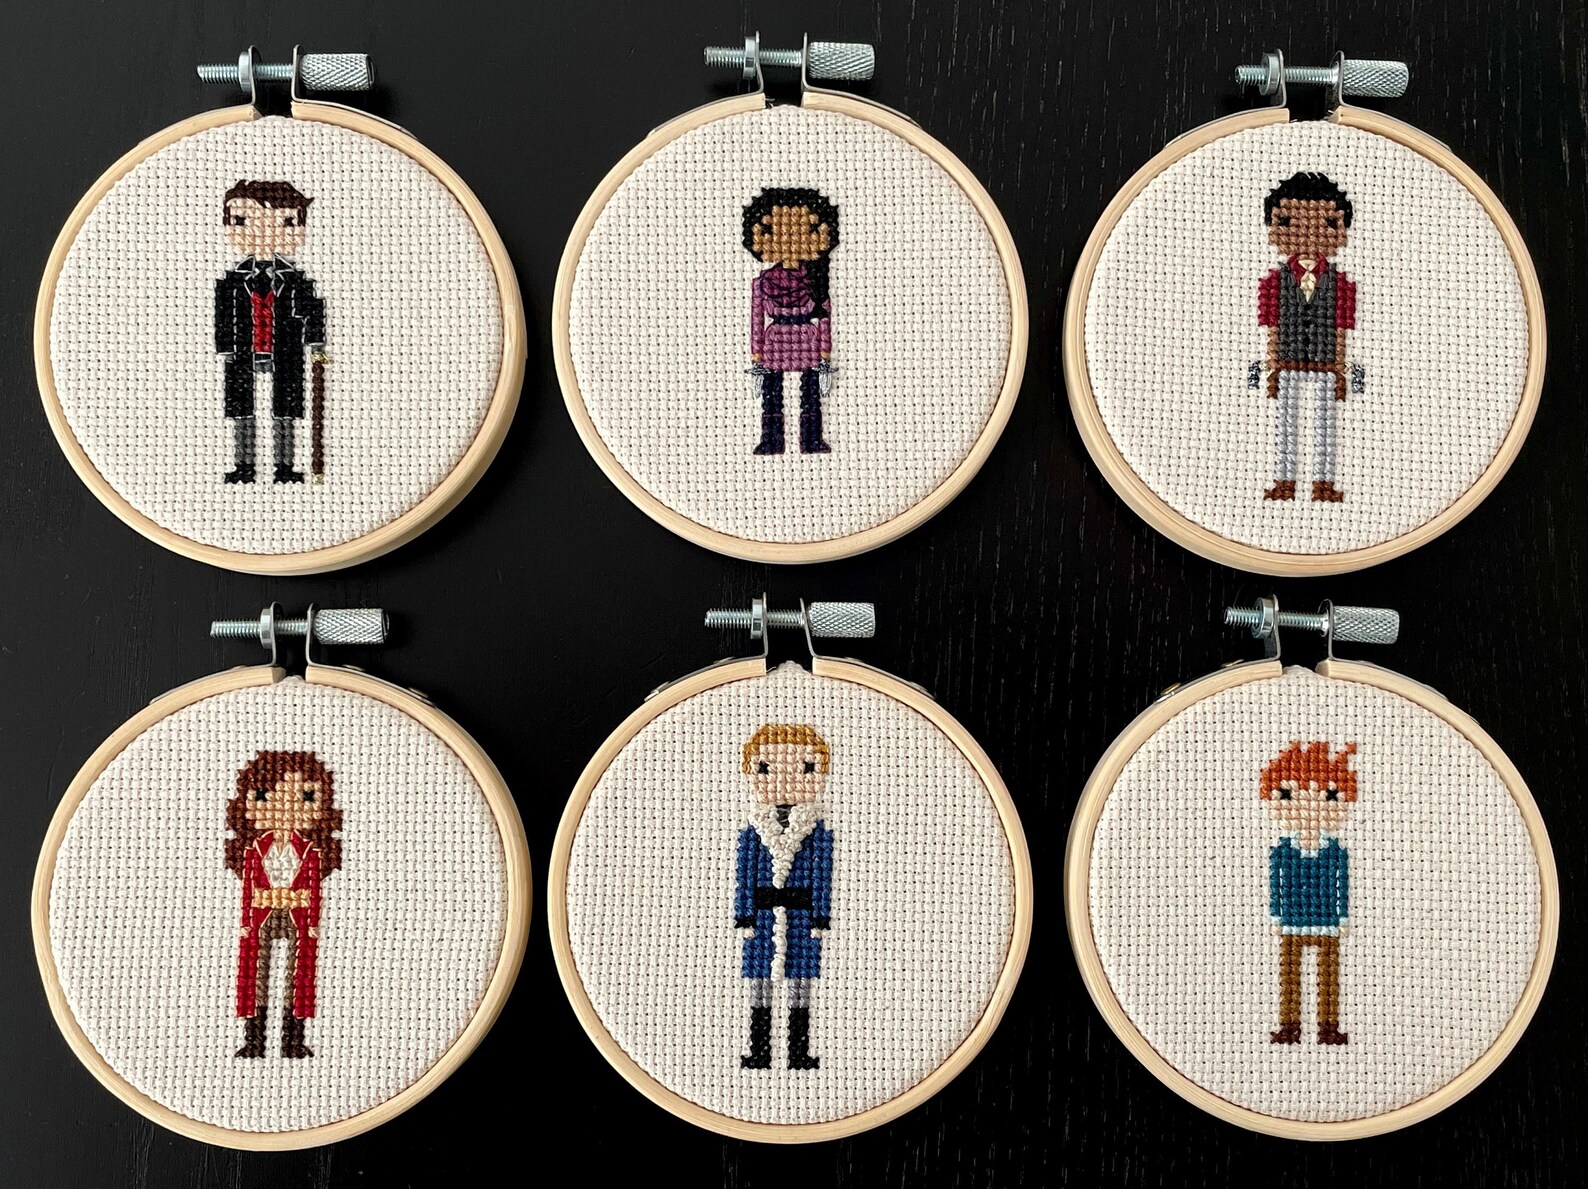 six small circular hoops each displaying a different character from Six of Crows